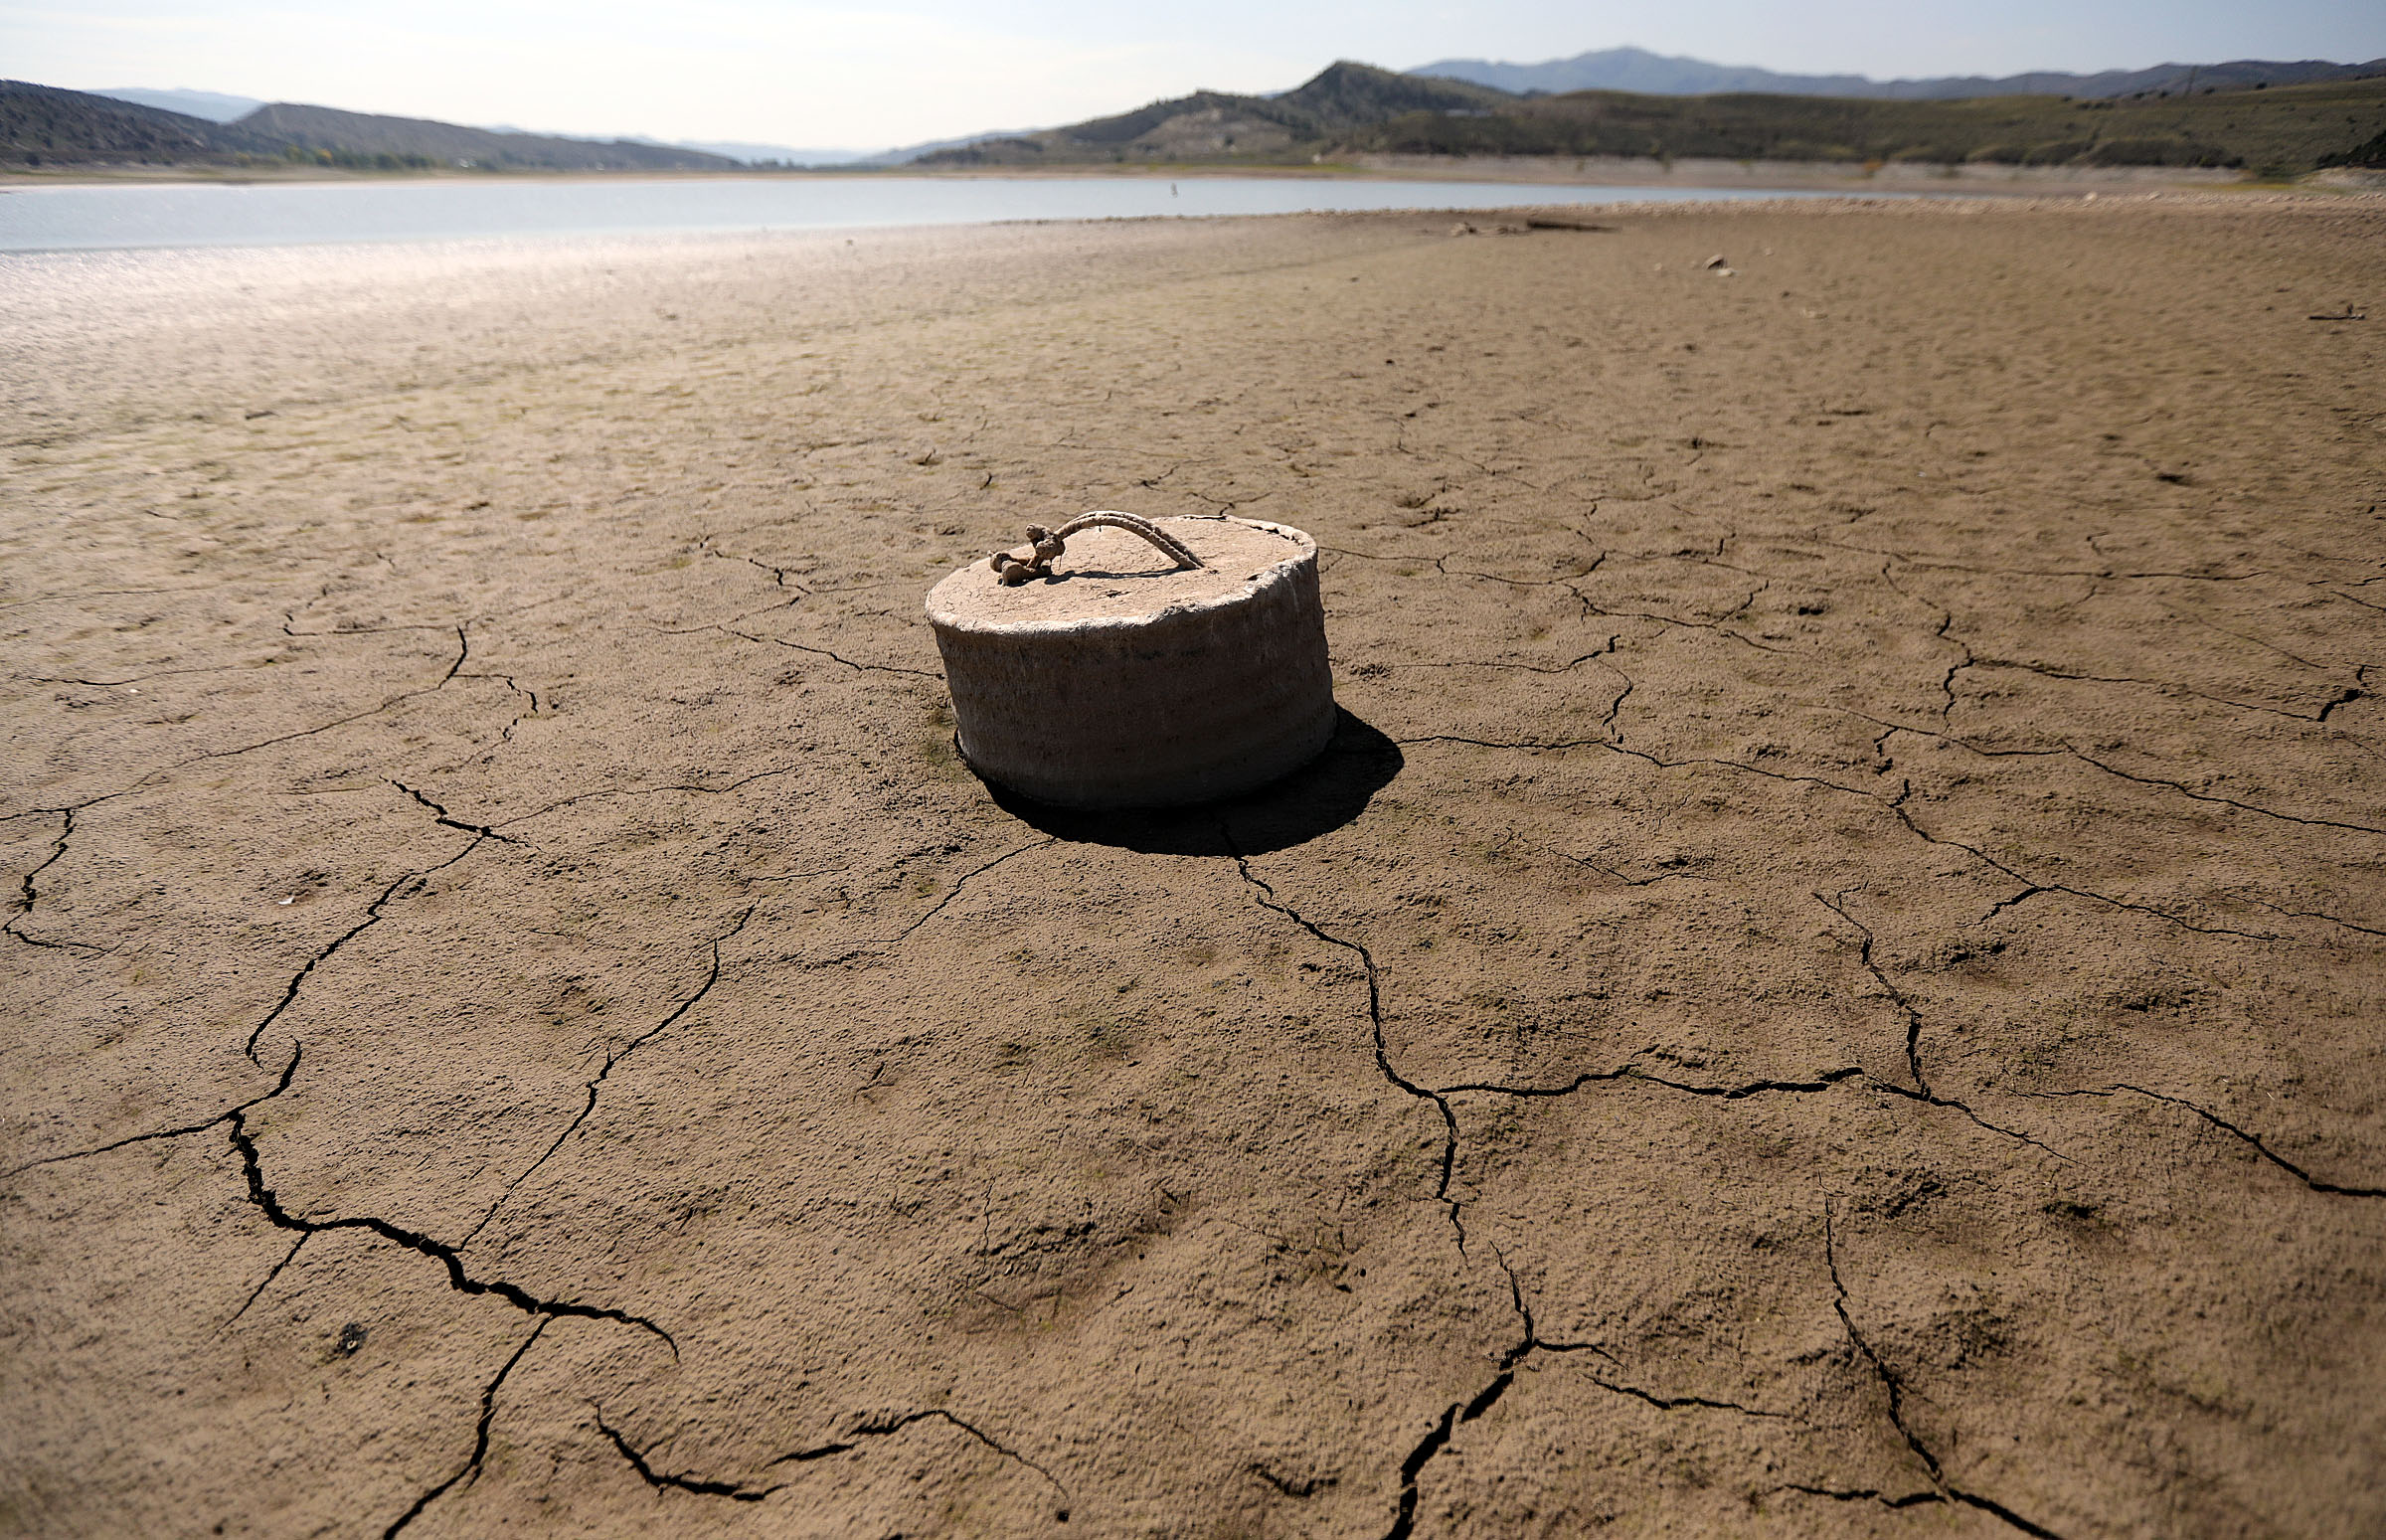 A mooring sinker is pictured on the dried up shore of Echo Reservoir during a drought.